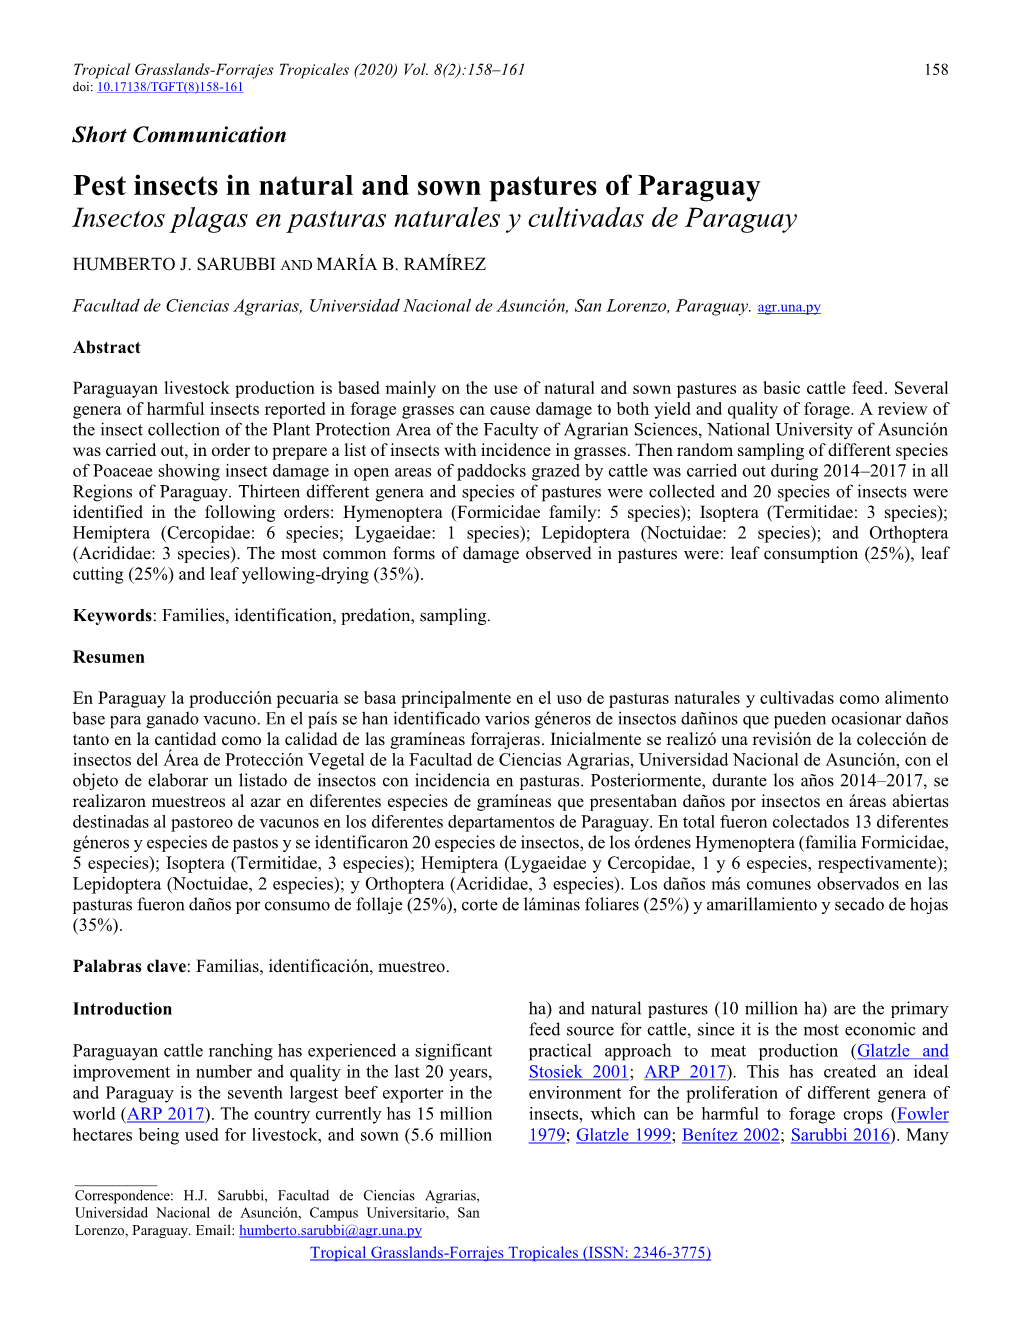 Pest Insects in Natural and Sown Pastures of Paraguay Insectos Plagas En Pasturas Naturales Y Cultivadas De Paraguay